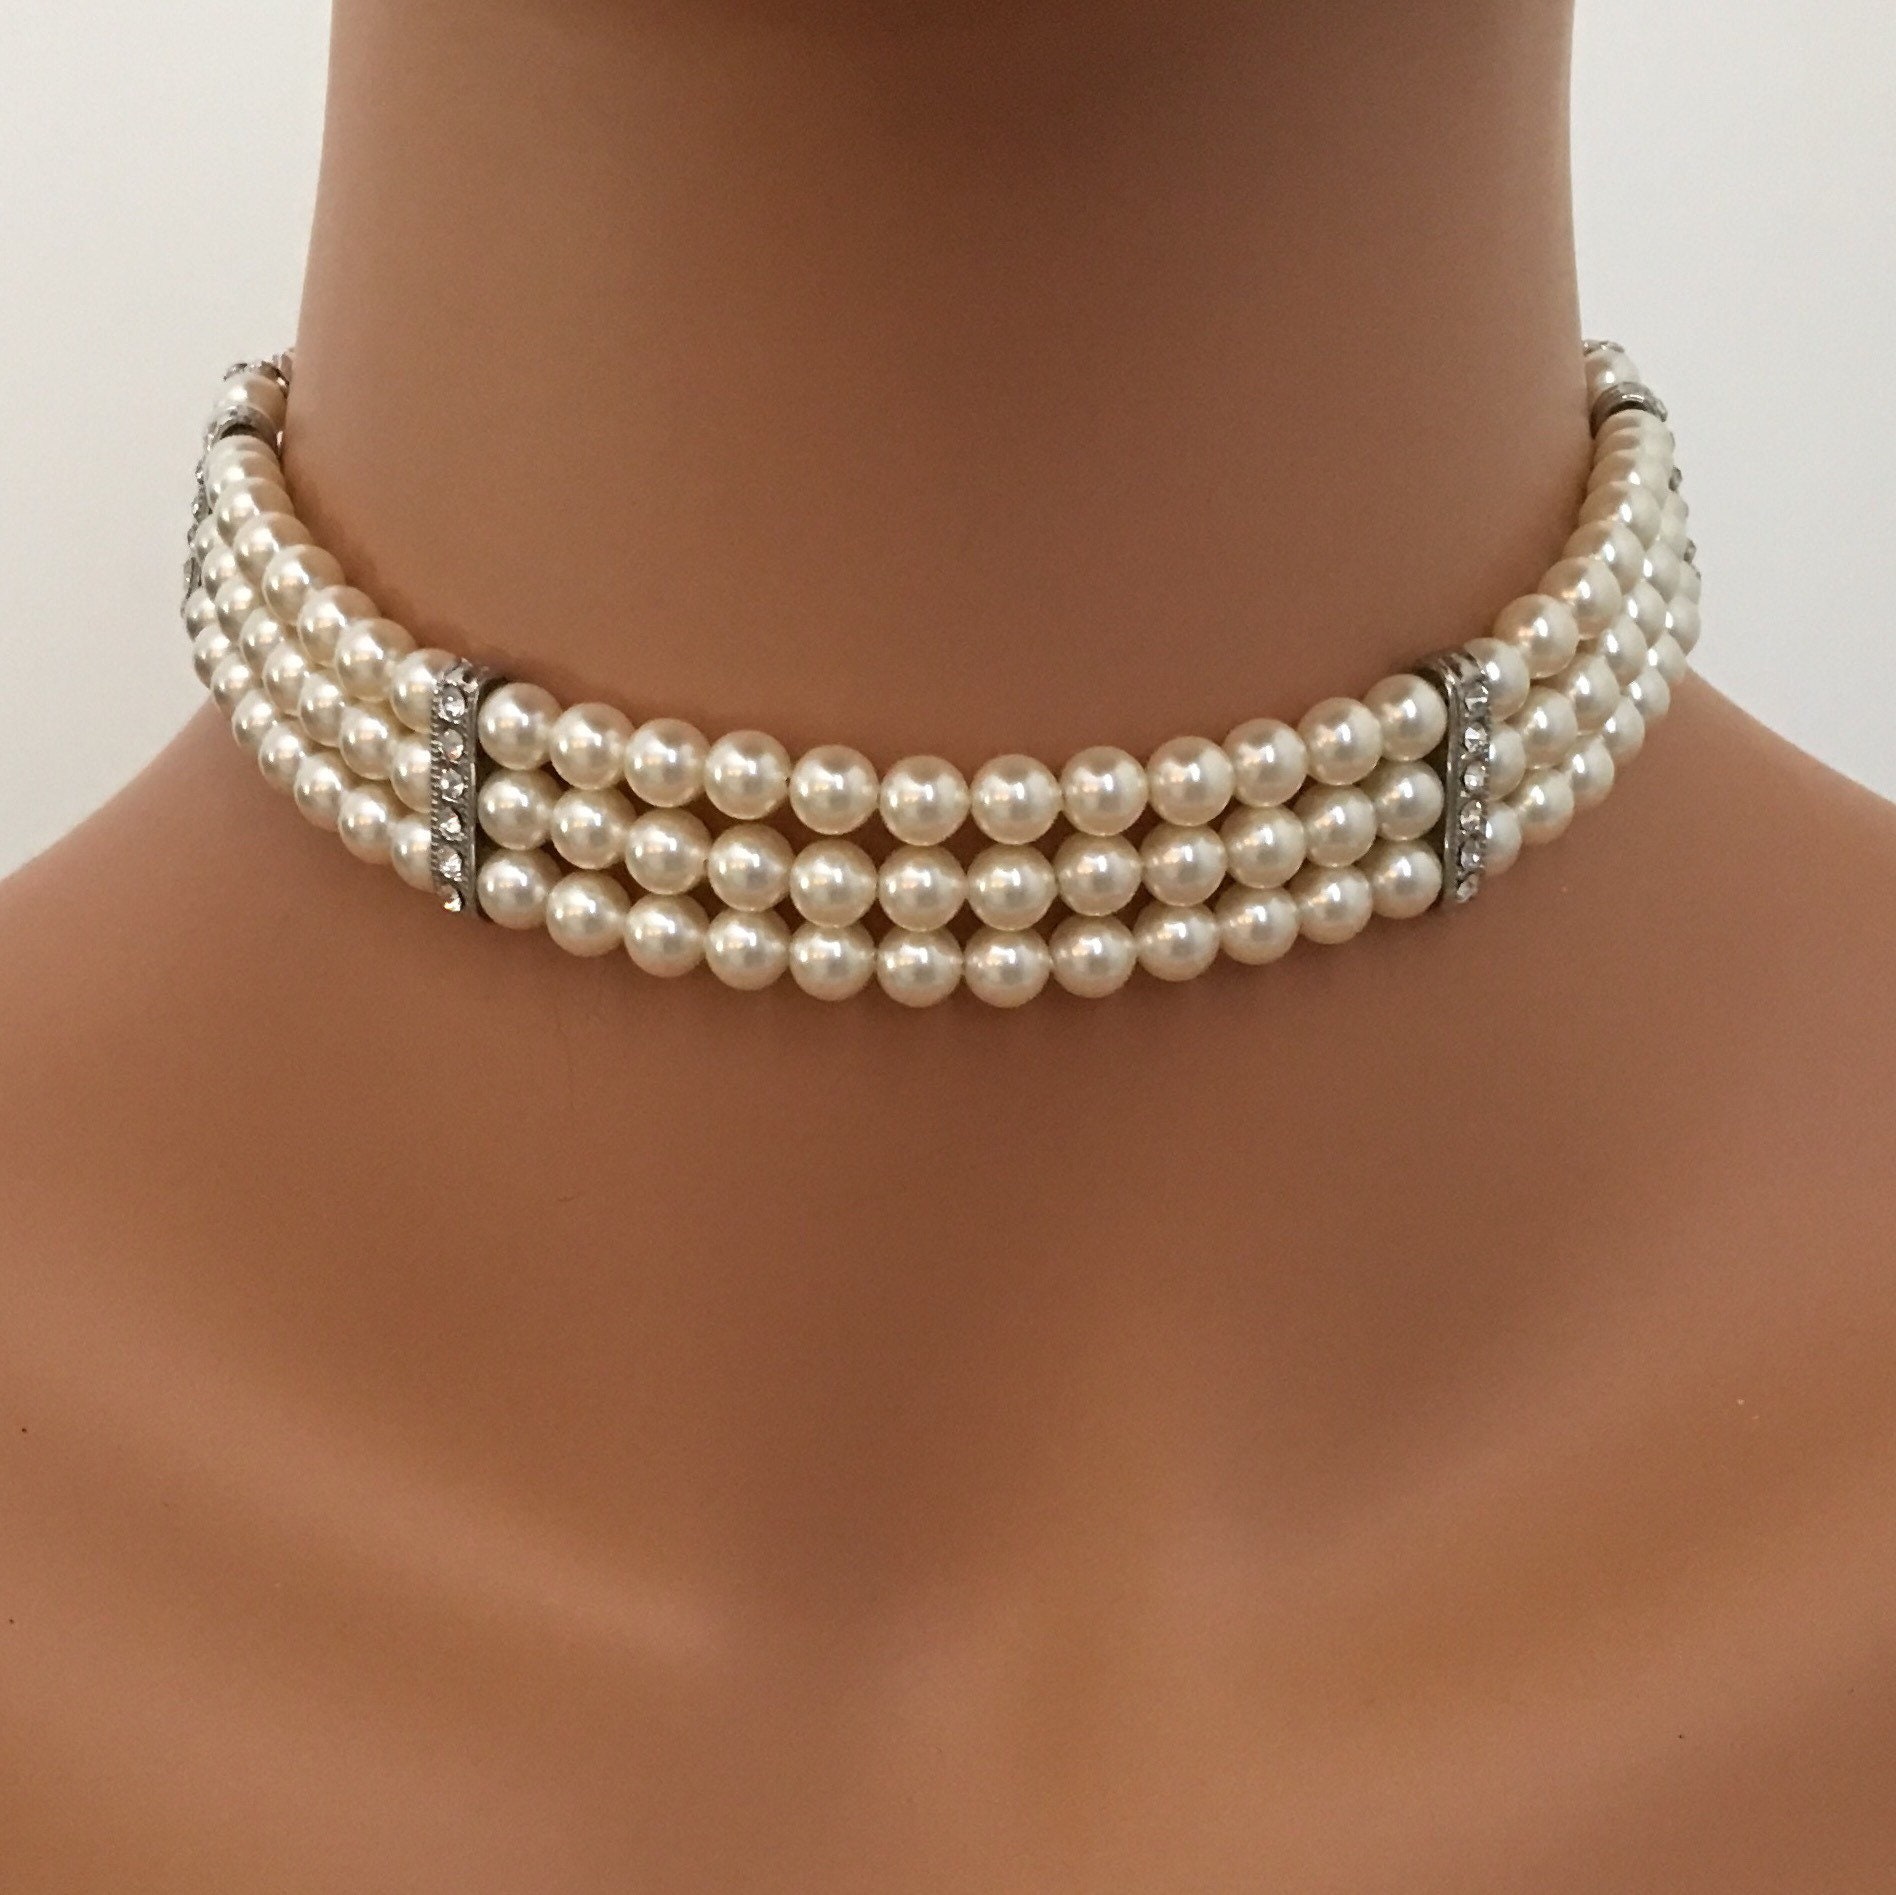 6mm pearl necklace Ivory Pearl Necklace with extension Pearl Necklace Trendy Charm Shop Glass Pearl Twisted Choker 4mm pearls